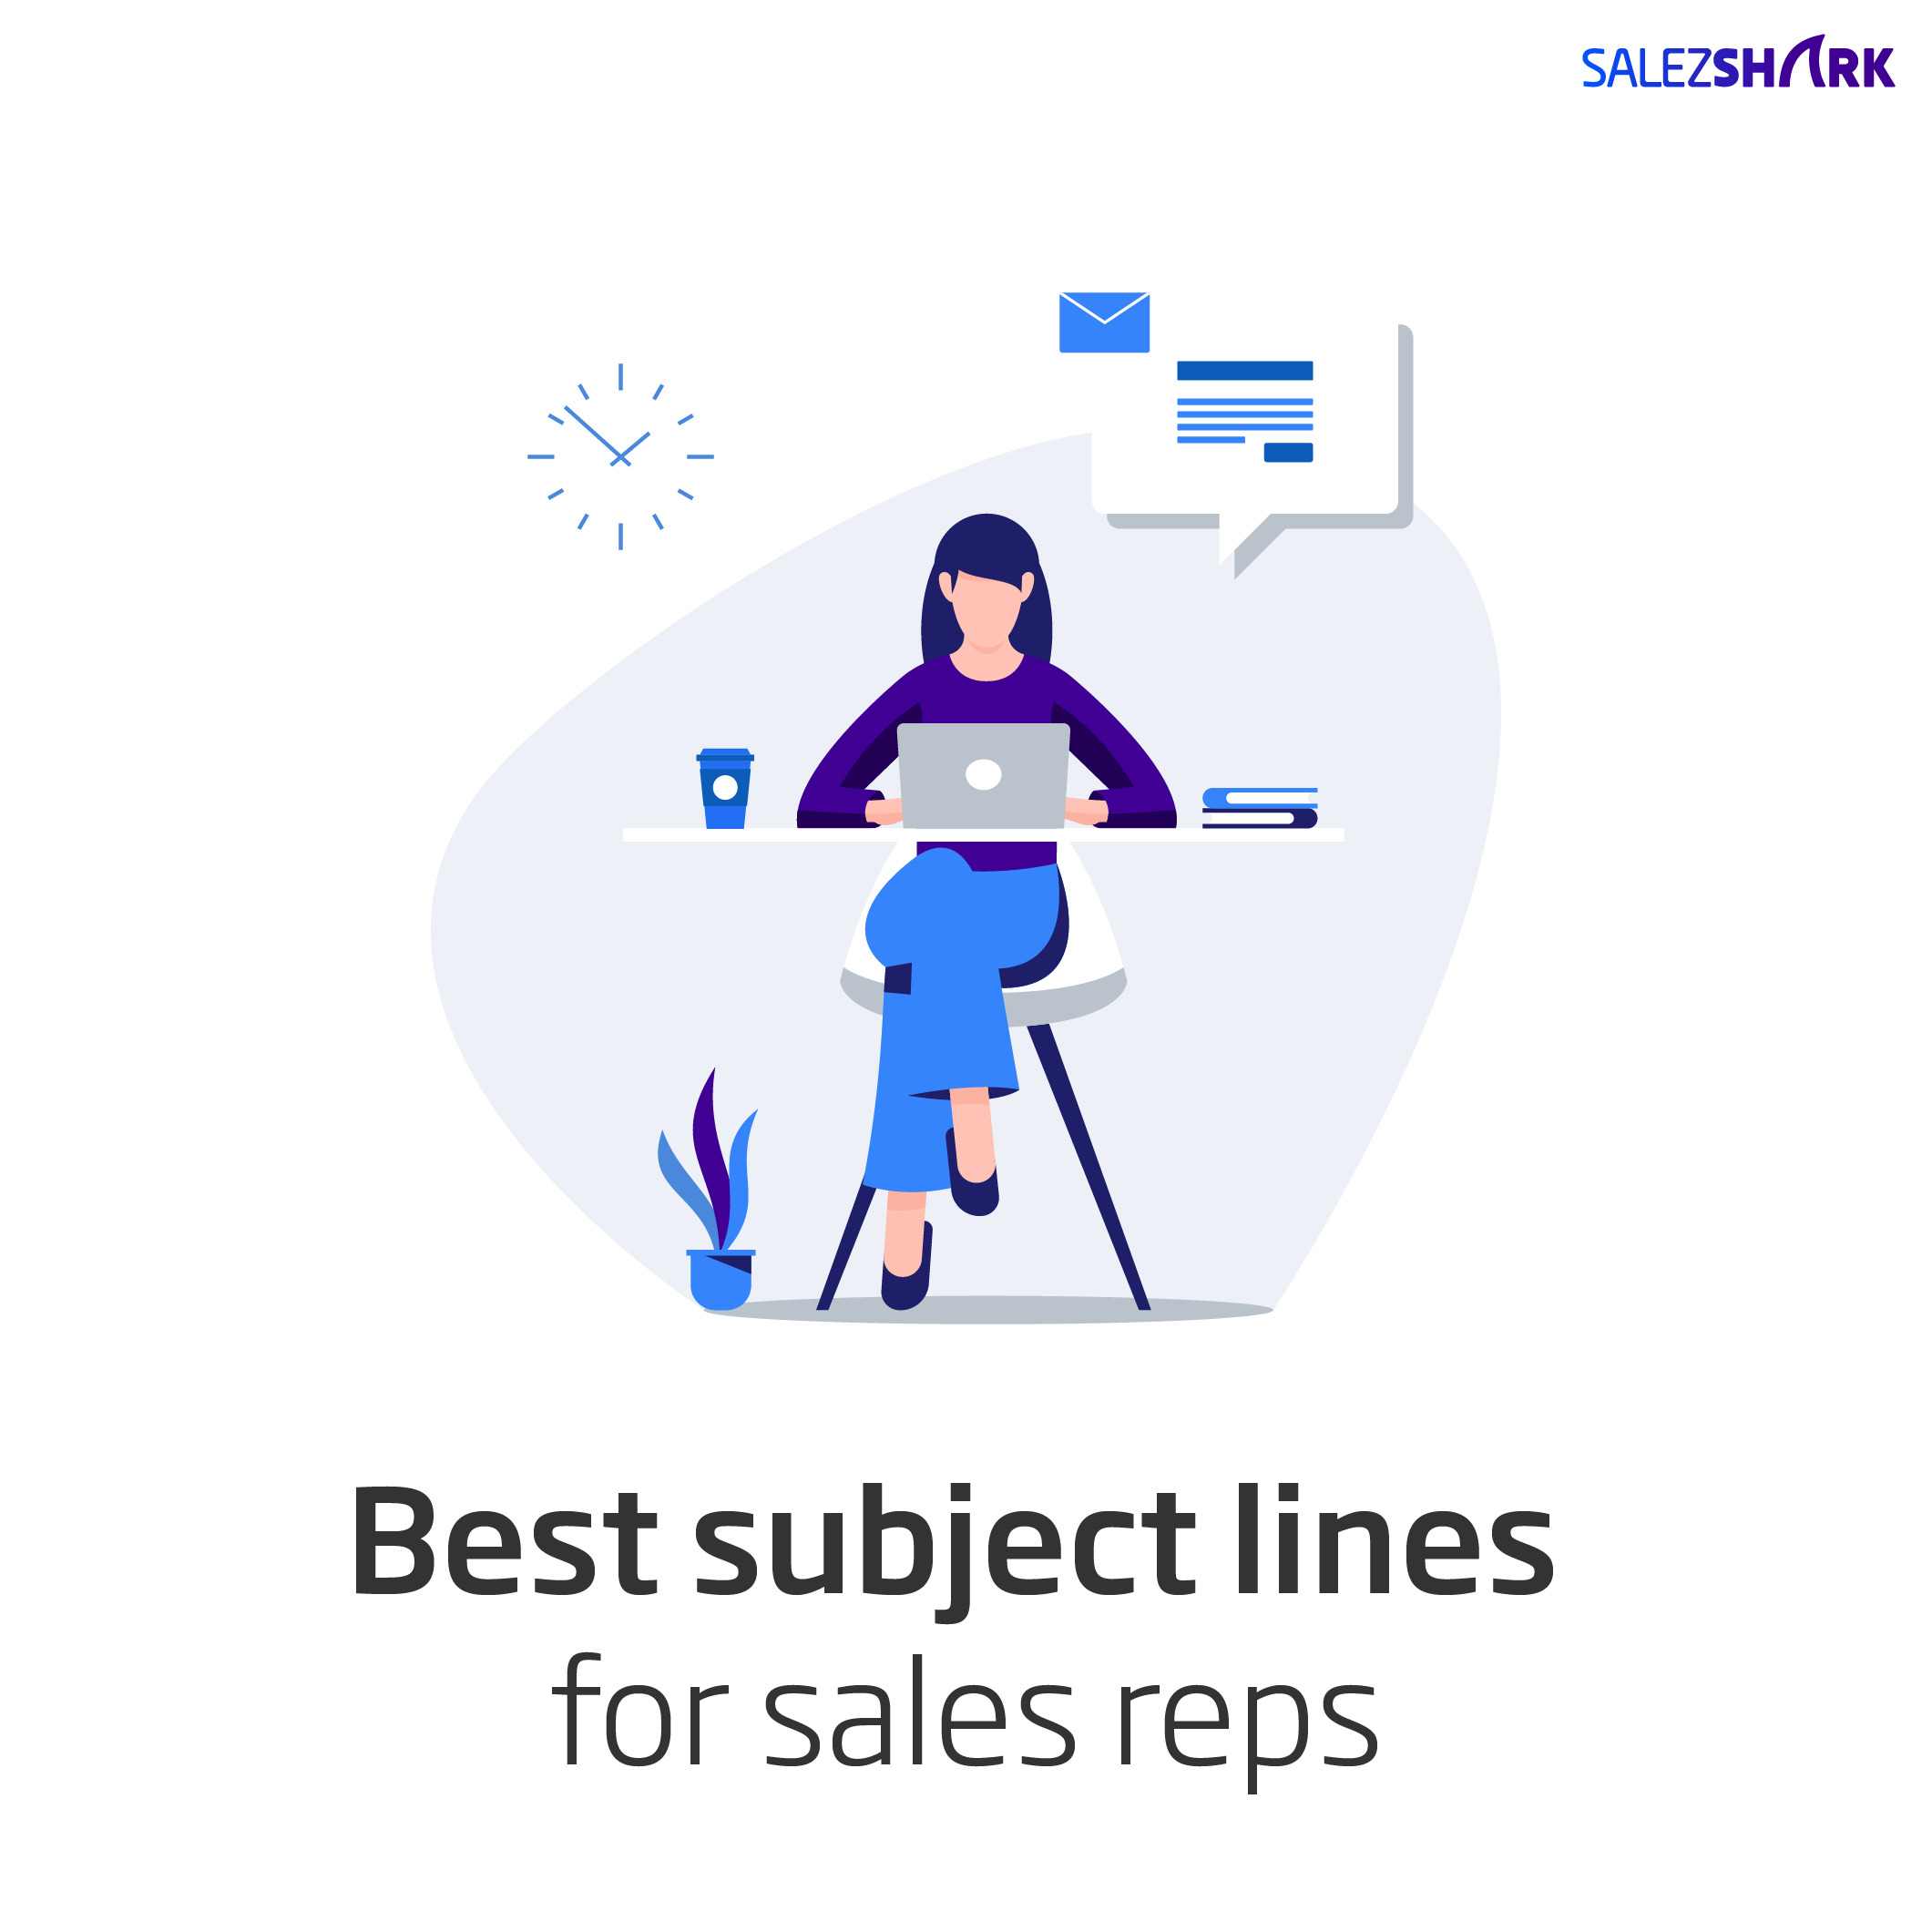 Best Subject Lines for Sales Reps in the Year 2020